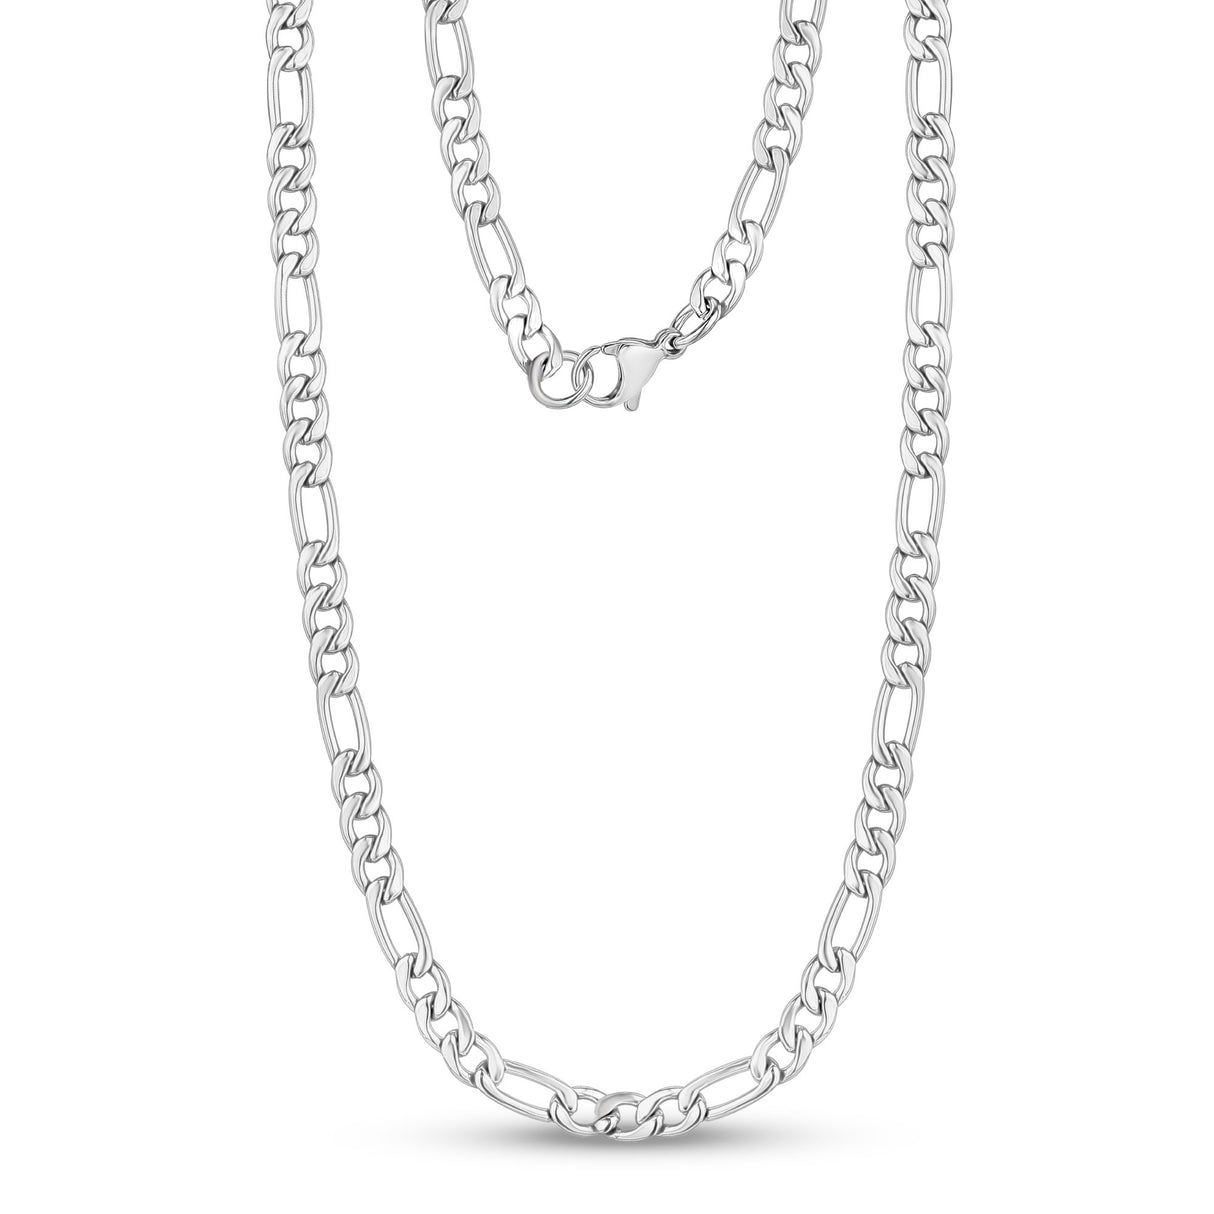 Unisex Necklaces - 5mm Stainless Steel Figaro Link Chain Necklace